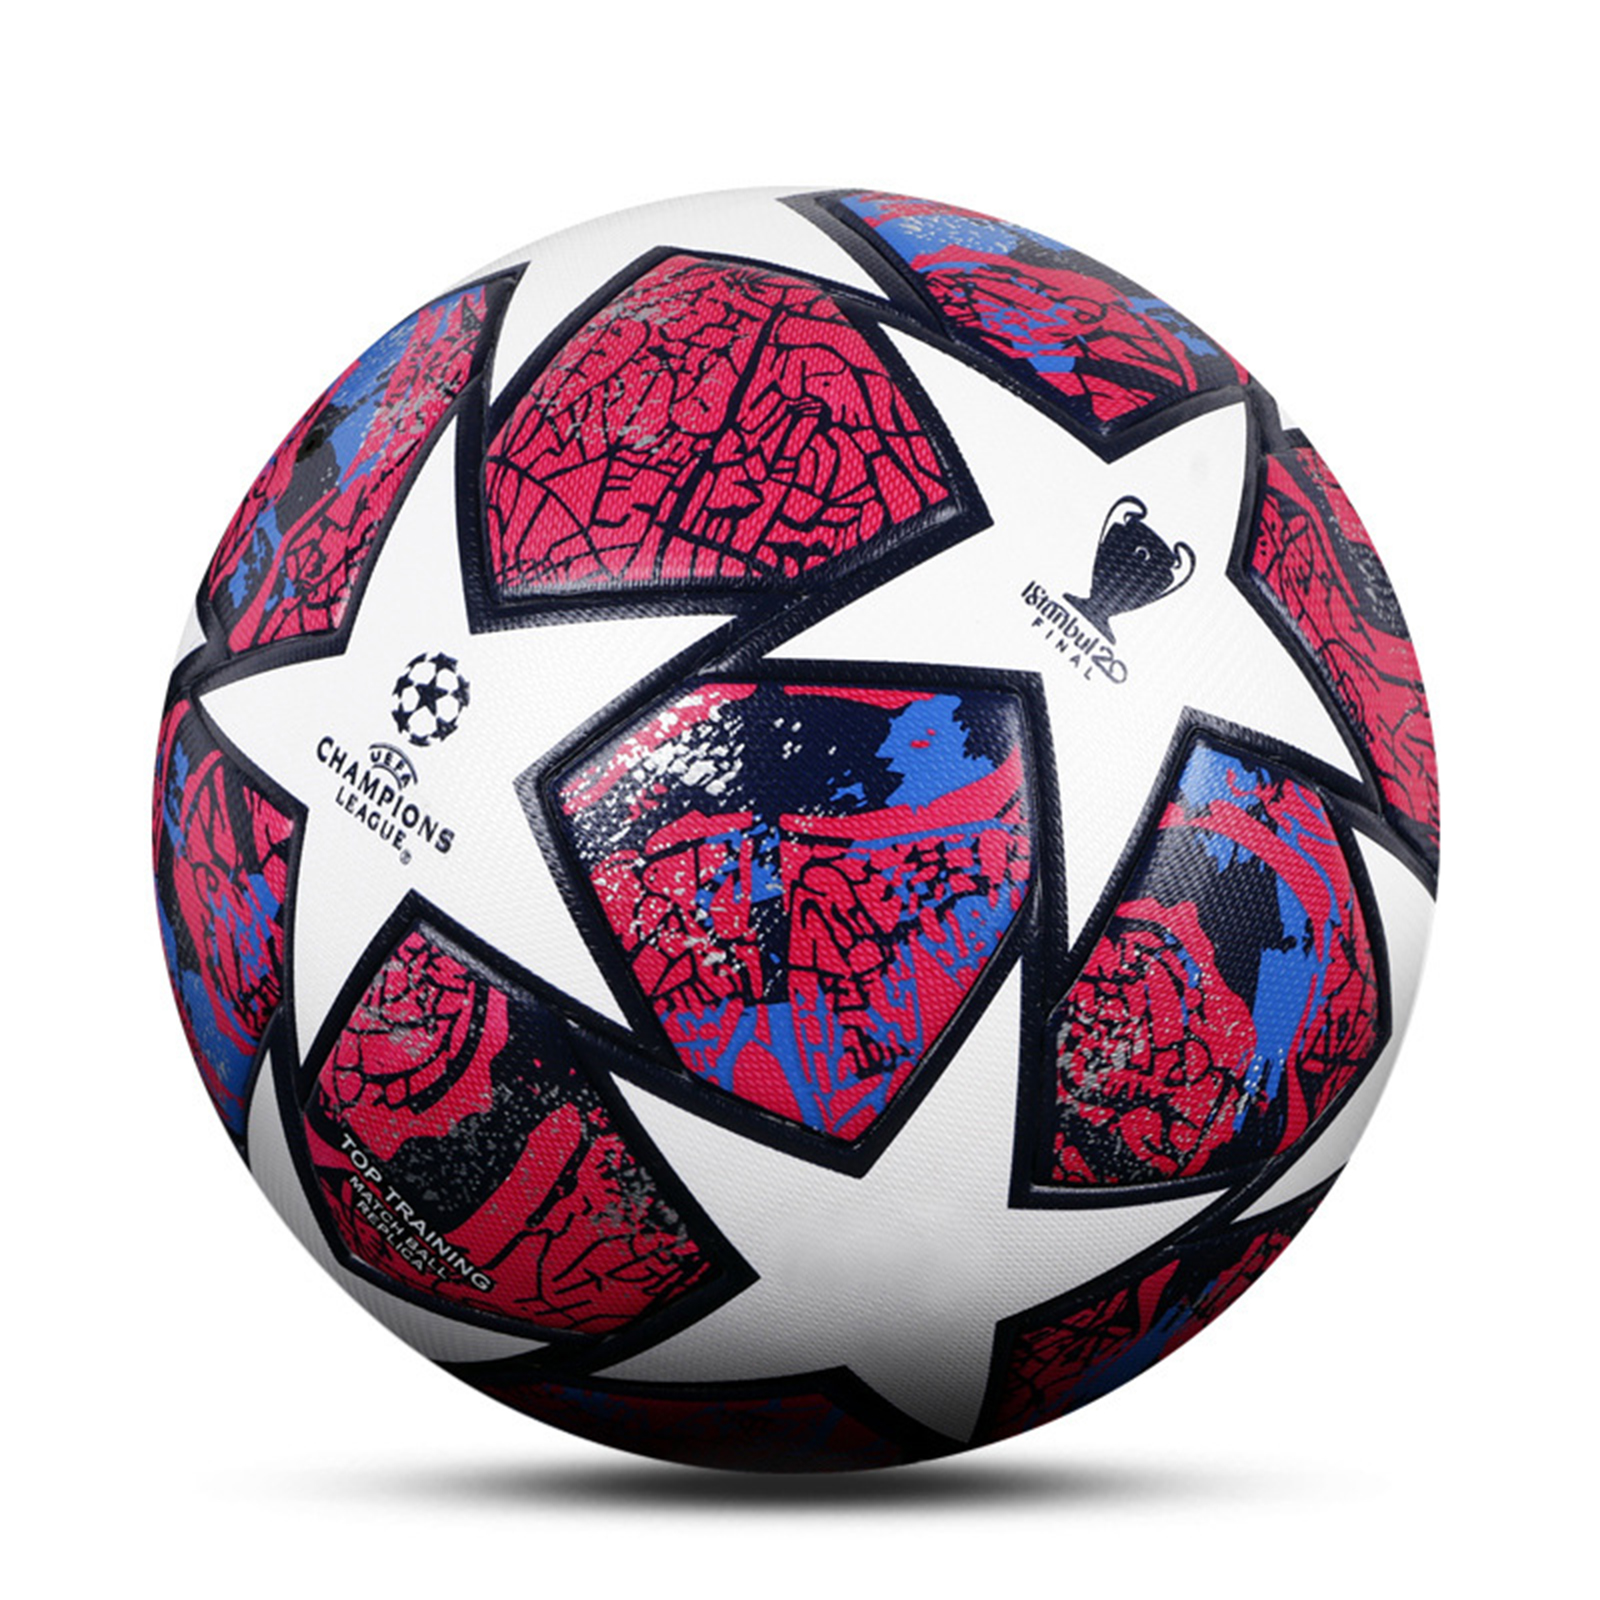 Premier Football Soccer Ball Adults Children Beach Ball size 5 32 Panel Stitched 